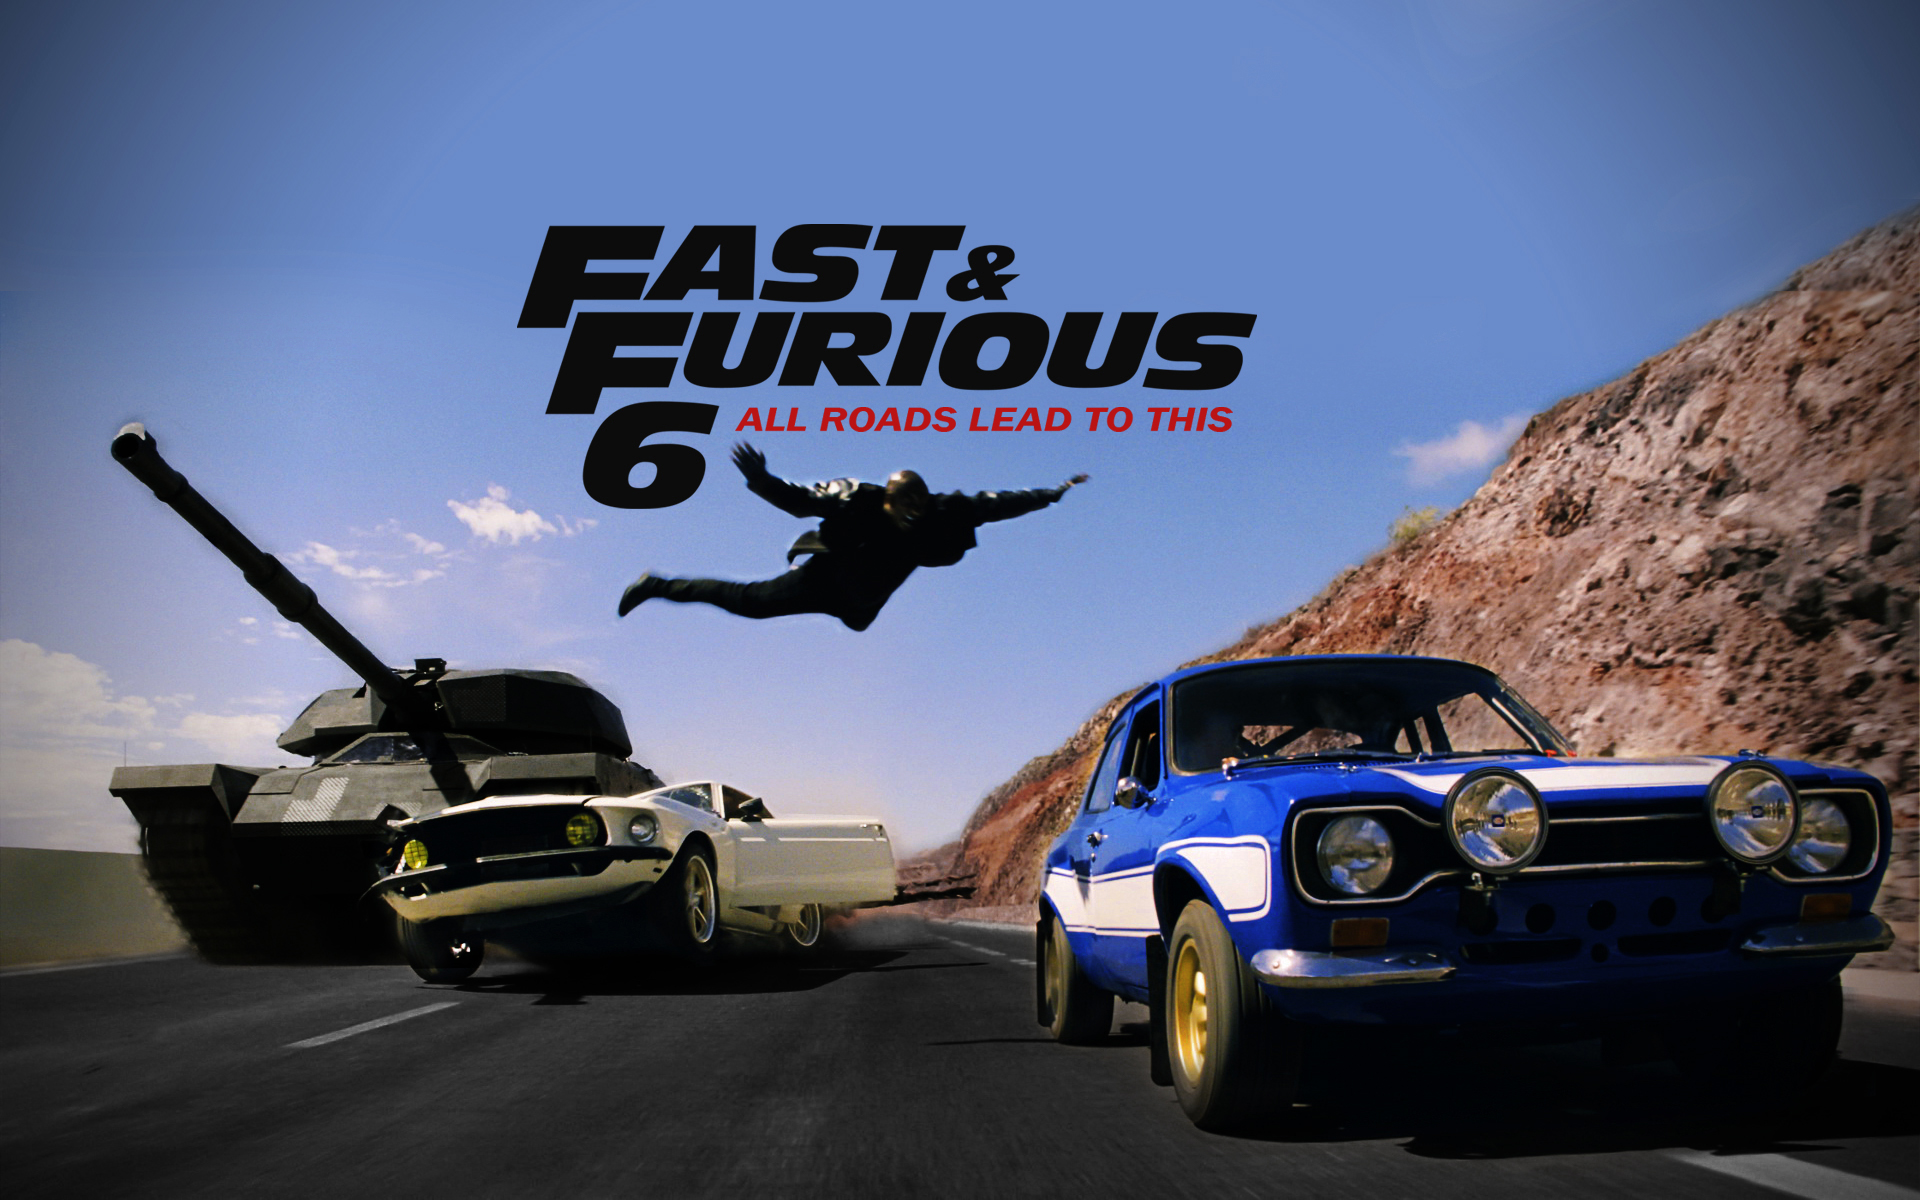 Fast & Furious wallpapers, Movie, HQ Fast & Furious pictures | 4K